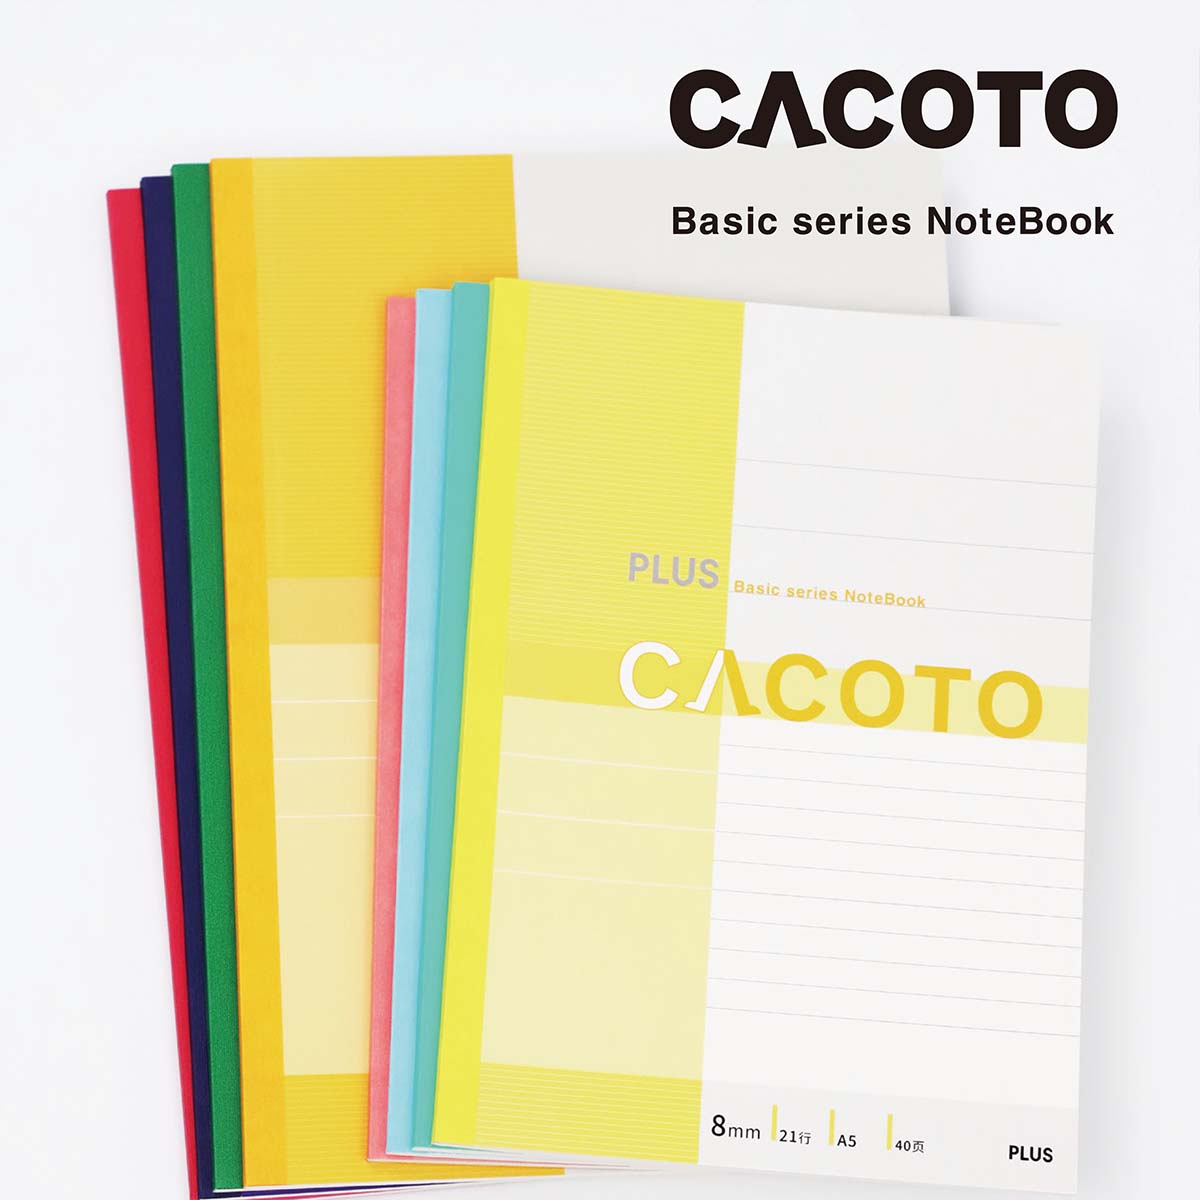 CACOTO NoteBook